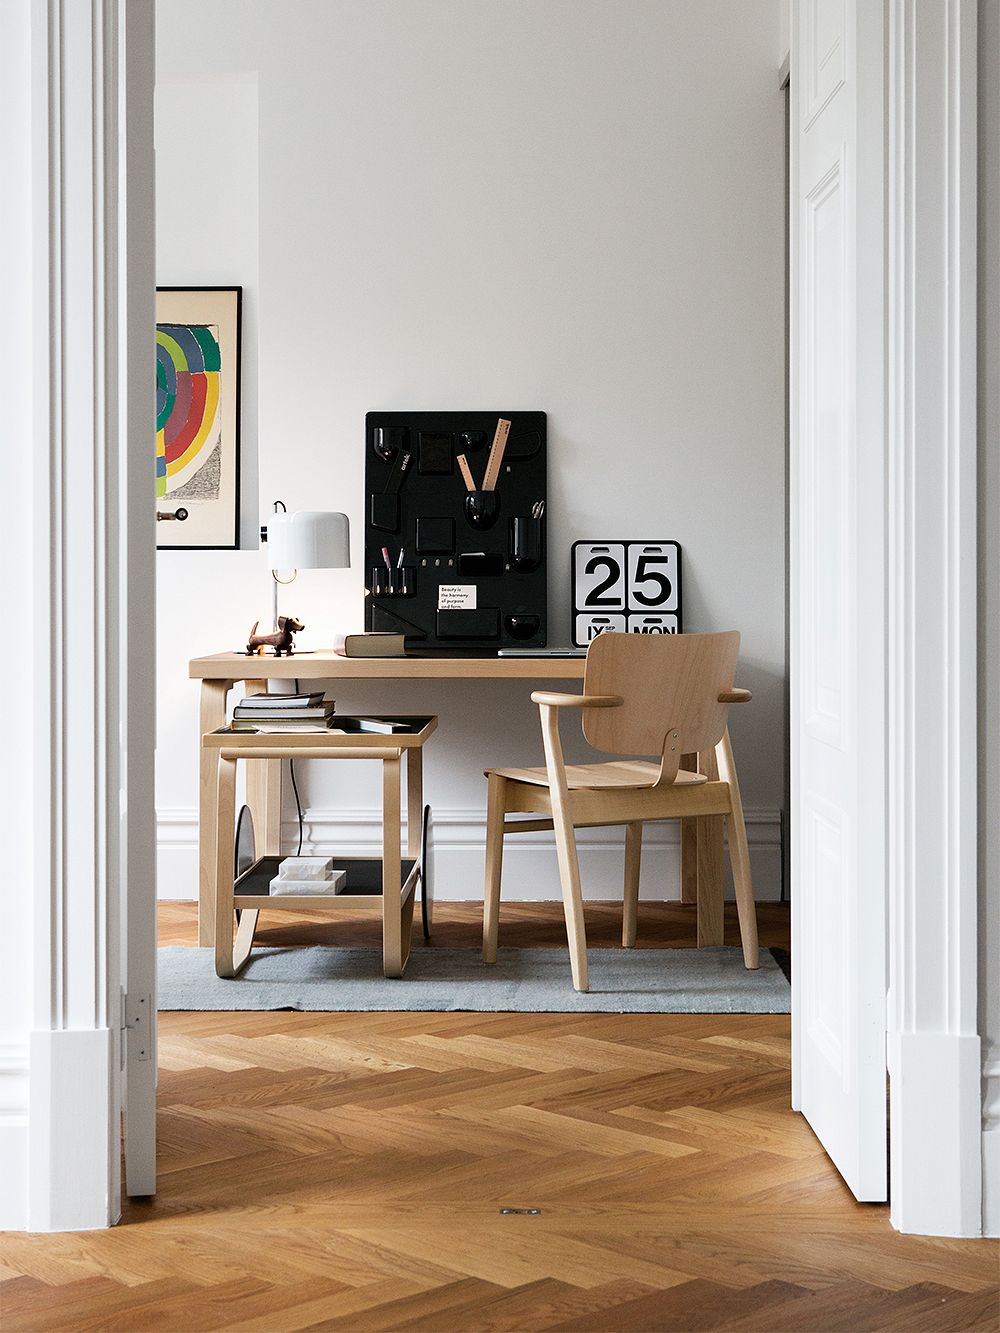 An image featuring Artek's Aalto table 80A, serving trolley 901 and Domus chair as part of a home office decor.